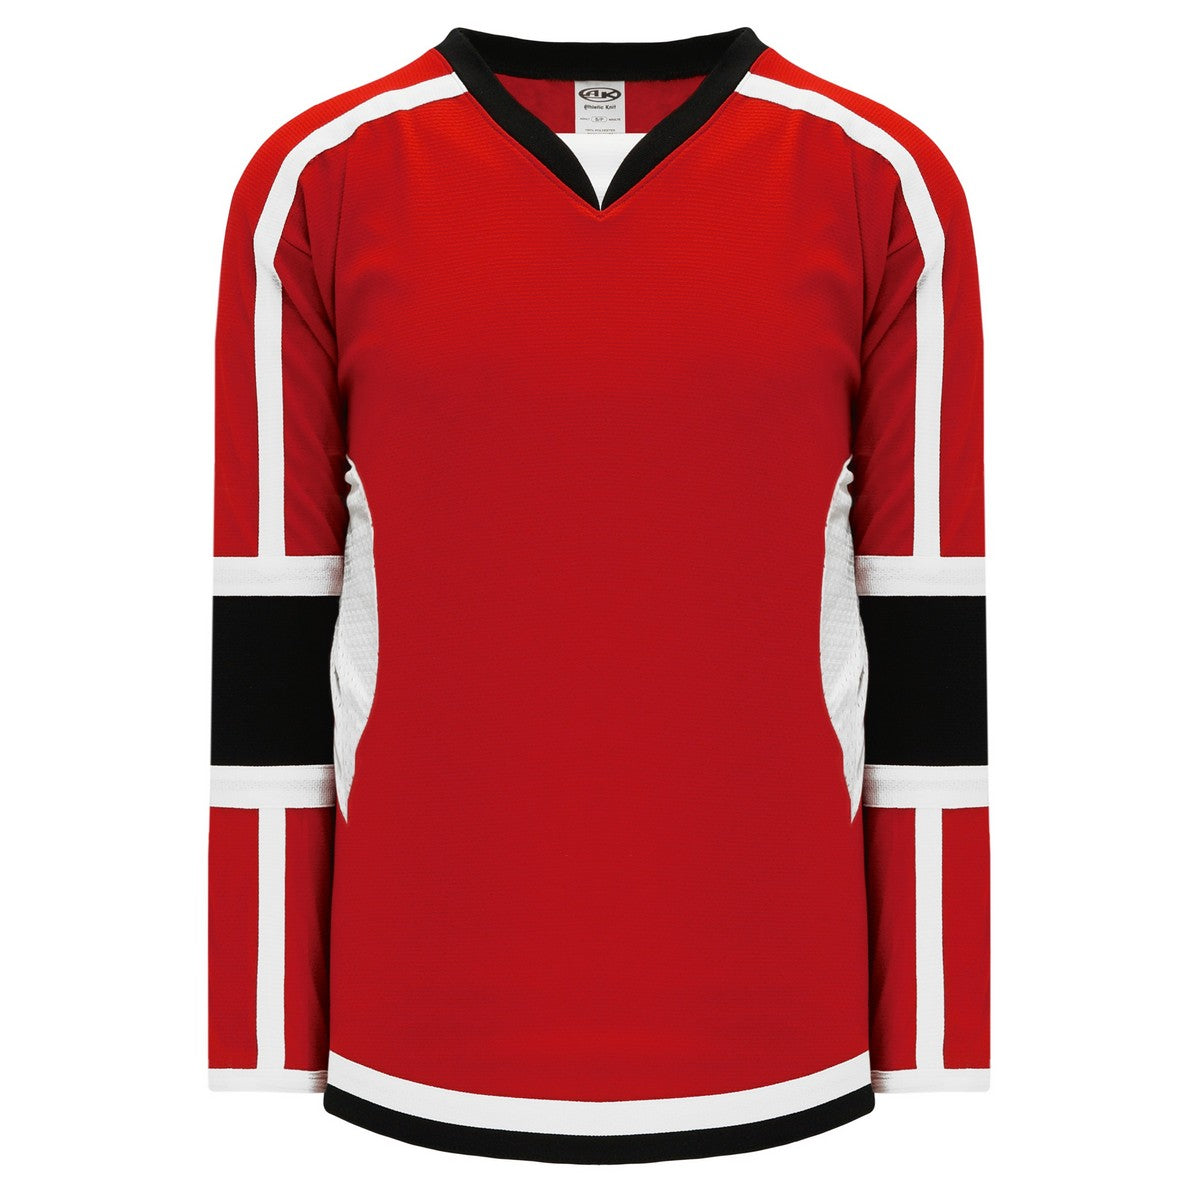 Select Series H7000 Jersey Red-Black